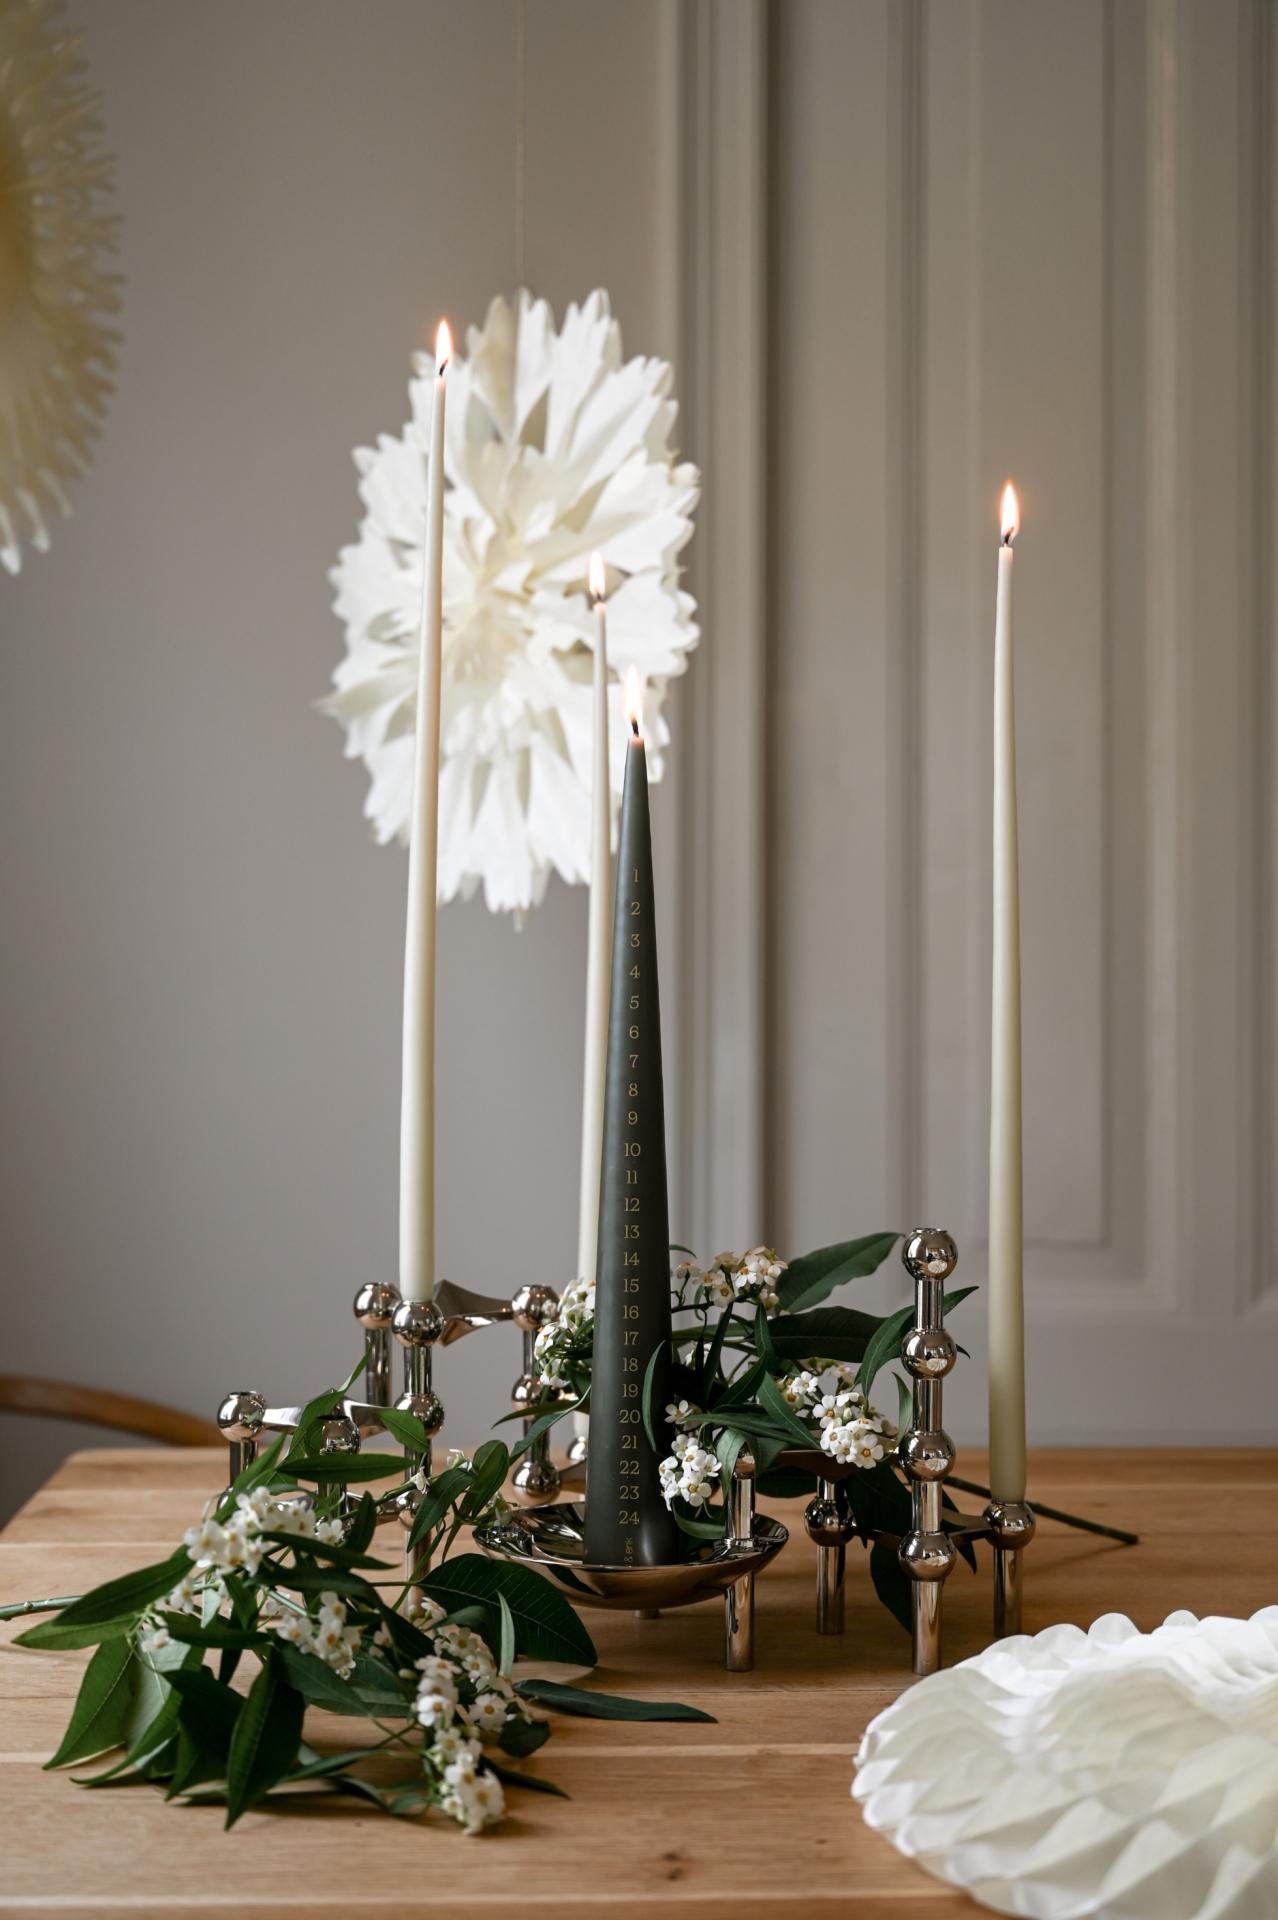 Interior Designer MJ shares her best tablescaping tips for Christmas, and beyond